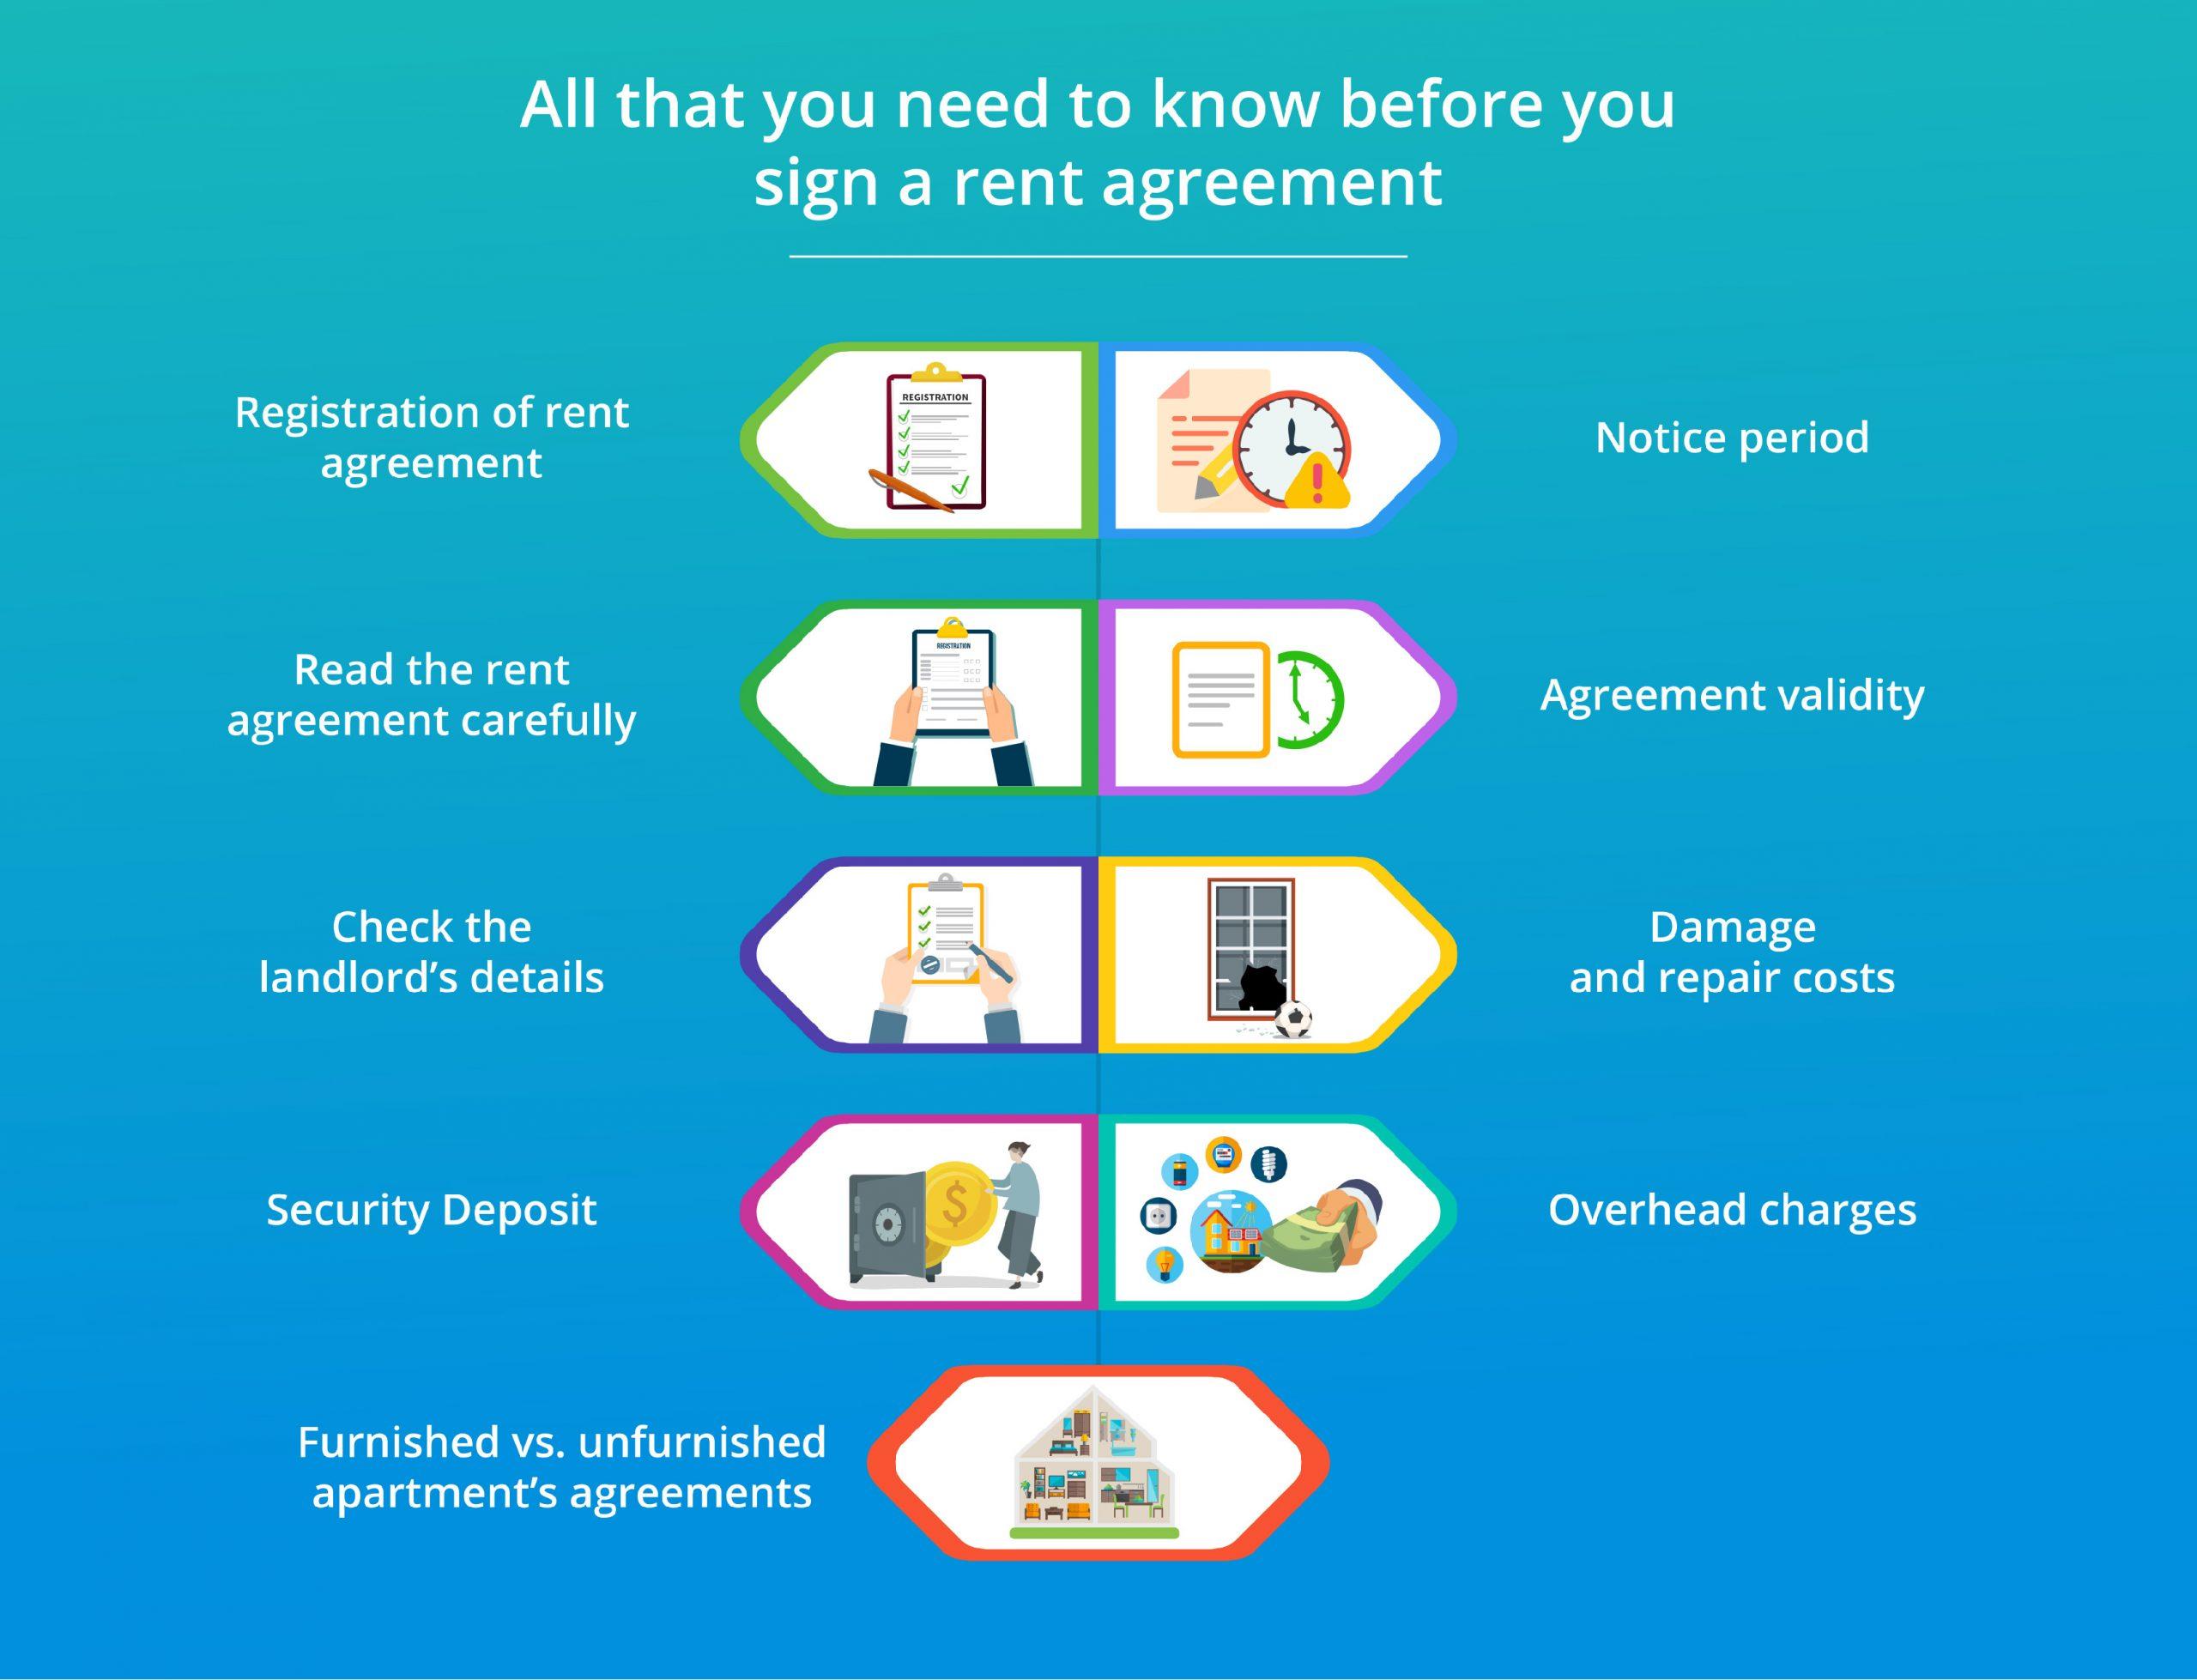 All that you need to know before you sign a rent agreement